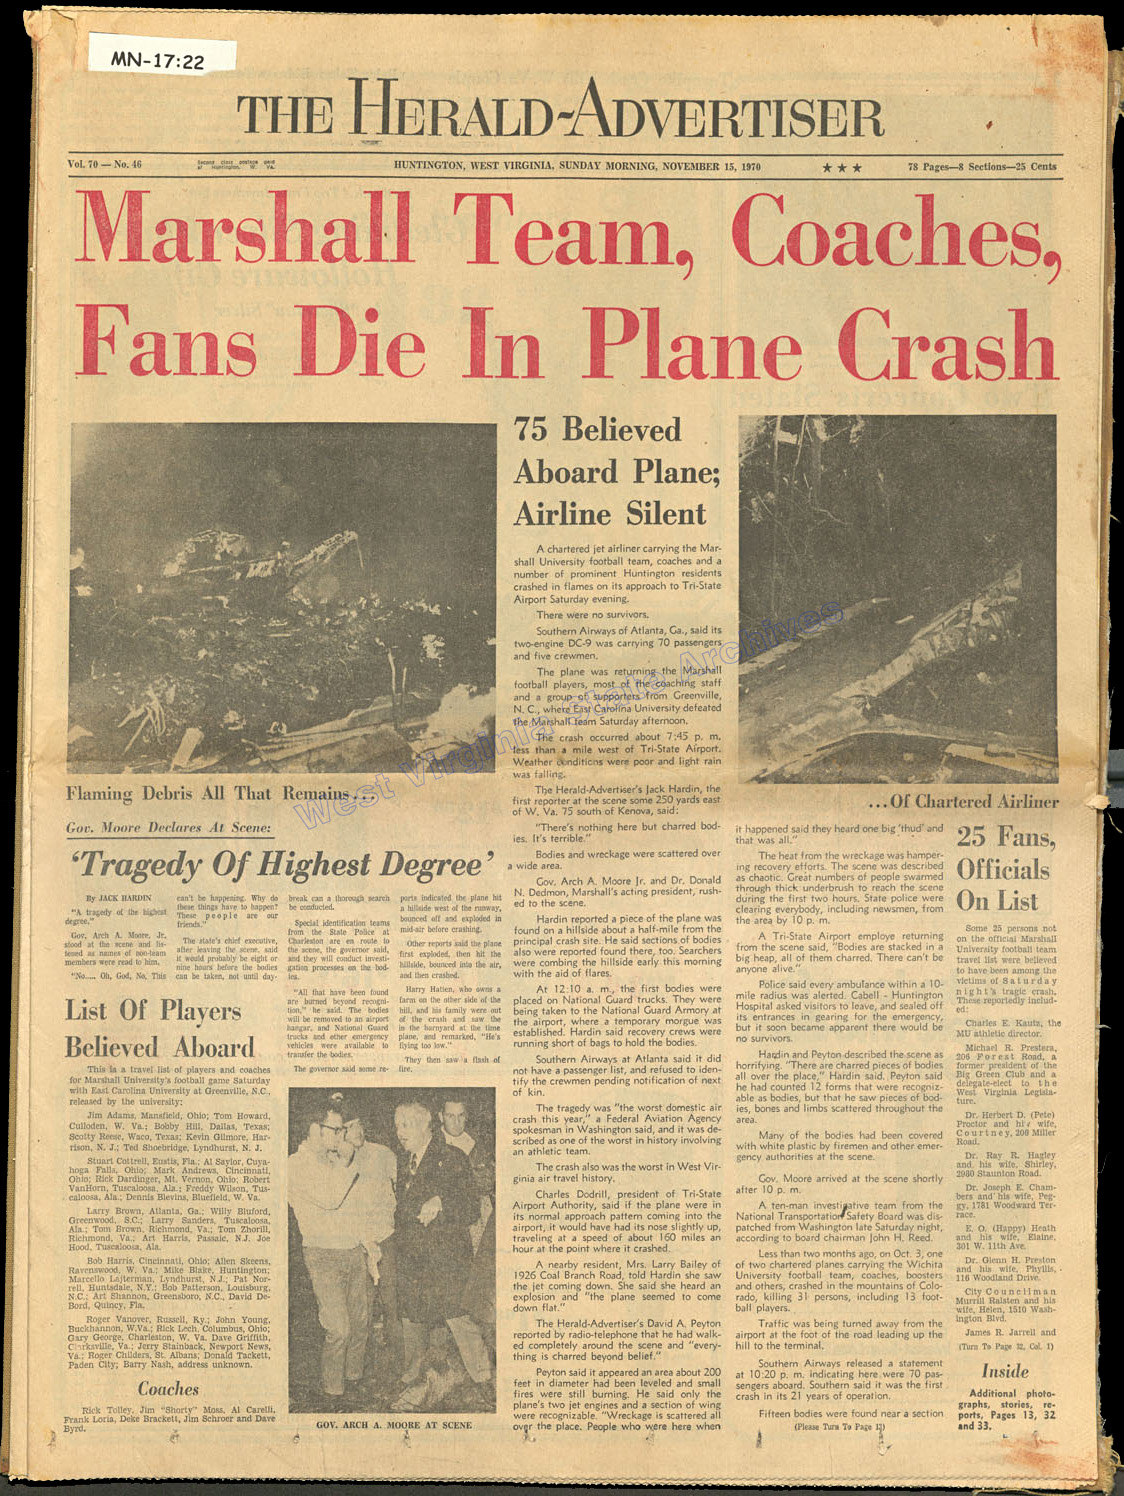 Herald-Advertiser front page reporting the Marshall plane crash the night before, 1970. (MN-17:22)